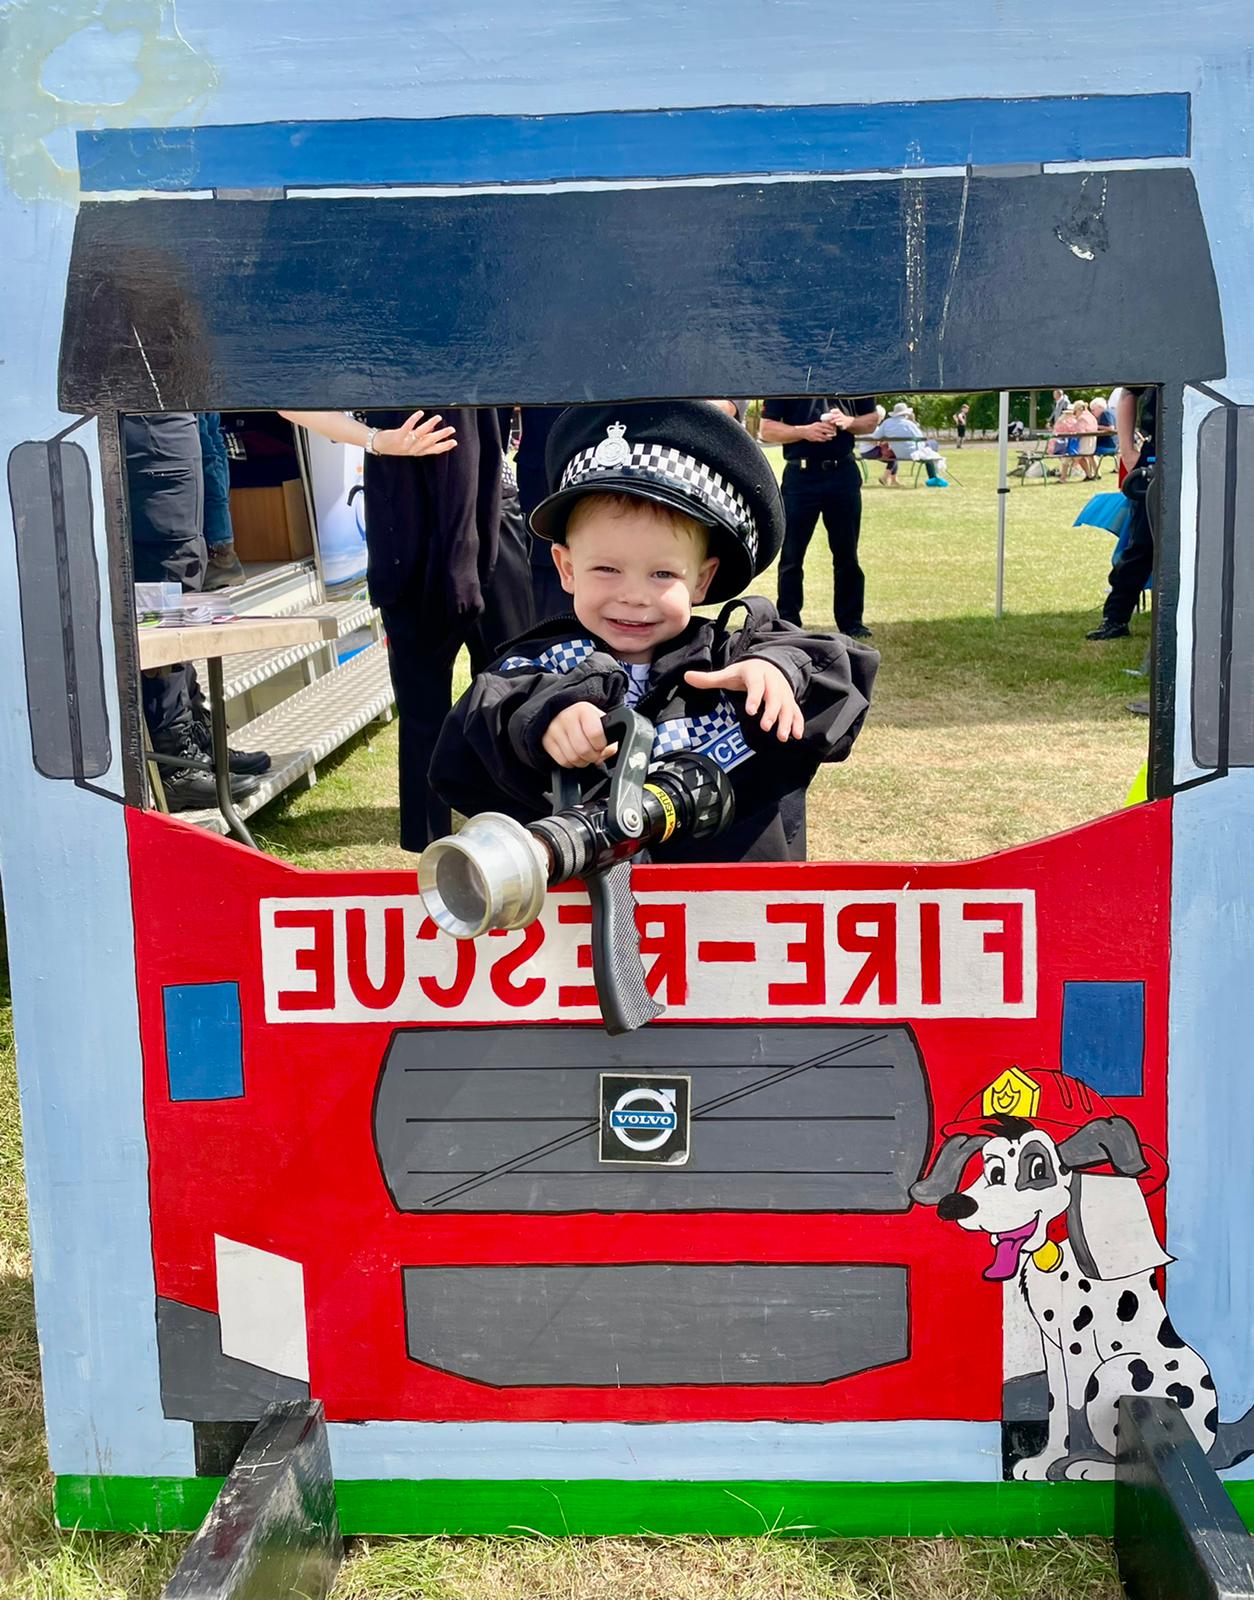 Young boy dressed up in police uniform having his picture taken in the wooden fire engine